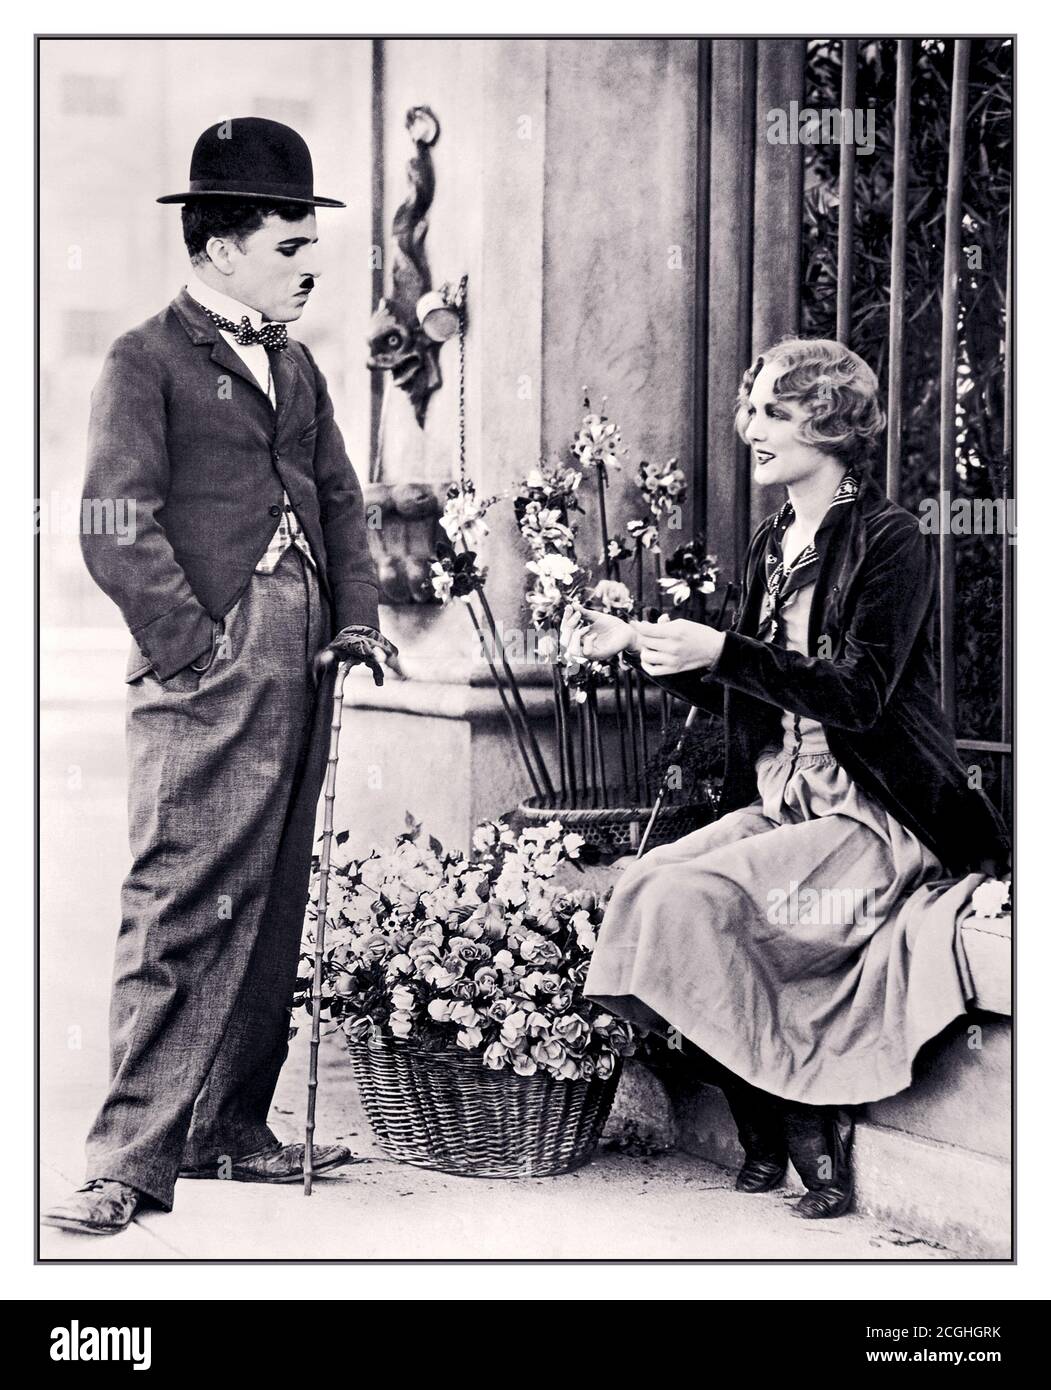 Archive Charlie Chaplin promotional photograph for Charlie Chaplin's 1931 film City Lights, depicting Chaplin as the Tramp and his co-star Virginia Cherrill as the Blind Flower Girl. The still is taken from the first scene with the blind flower girl, which was first shot sometime between December 27, 1928, and April 1929, then reshot in late 1929. This image is most likely from the later reshoots. This promotional copy was created on January 2, 1931, and the film itself was released in January 30, 1931. Stock Photo